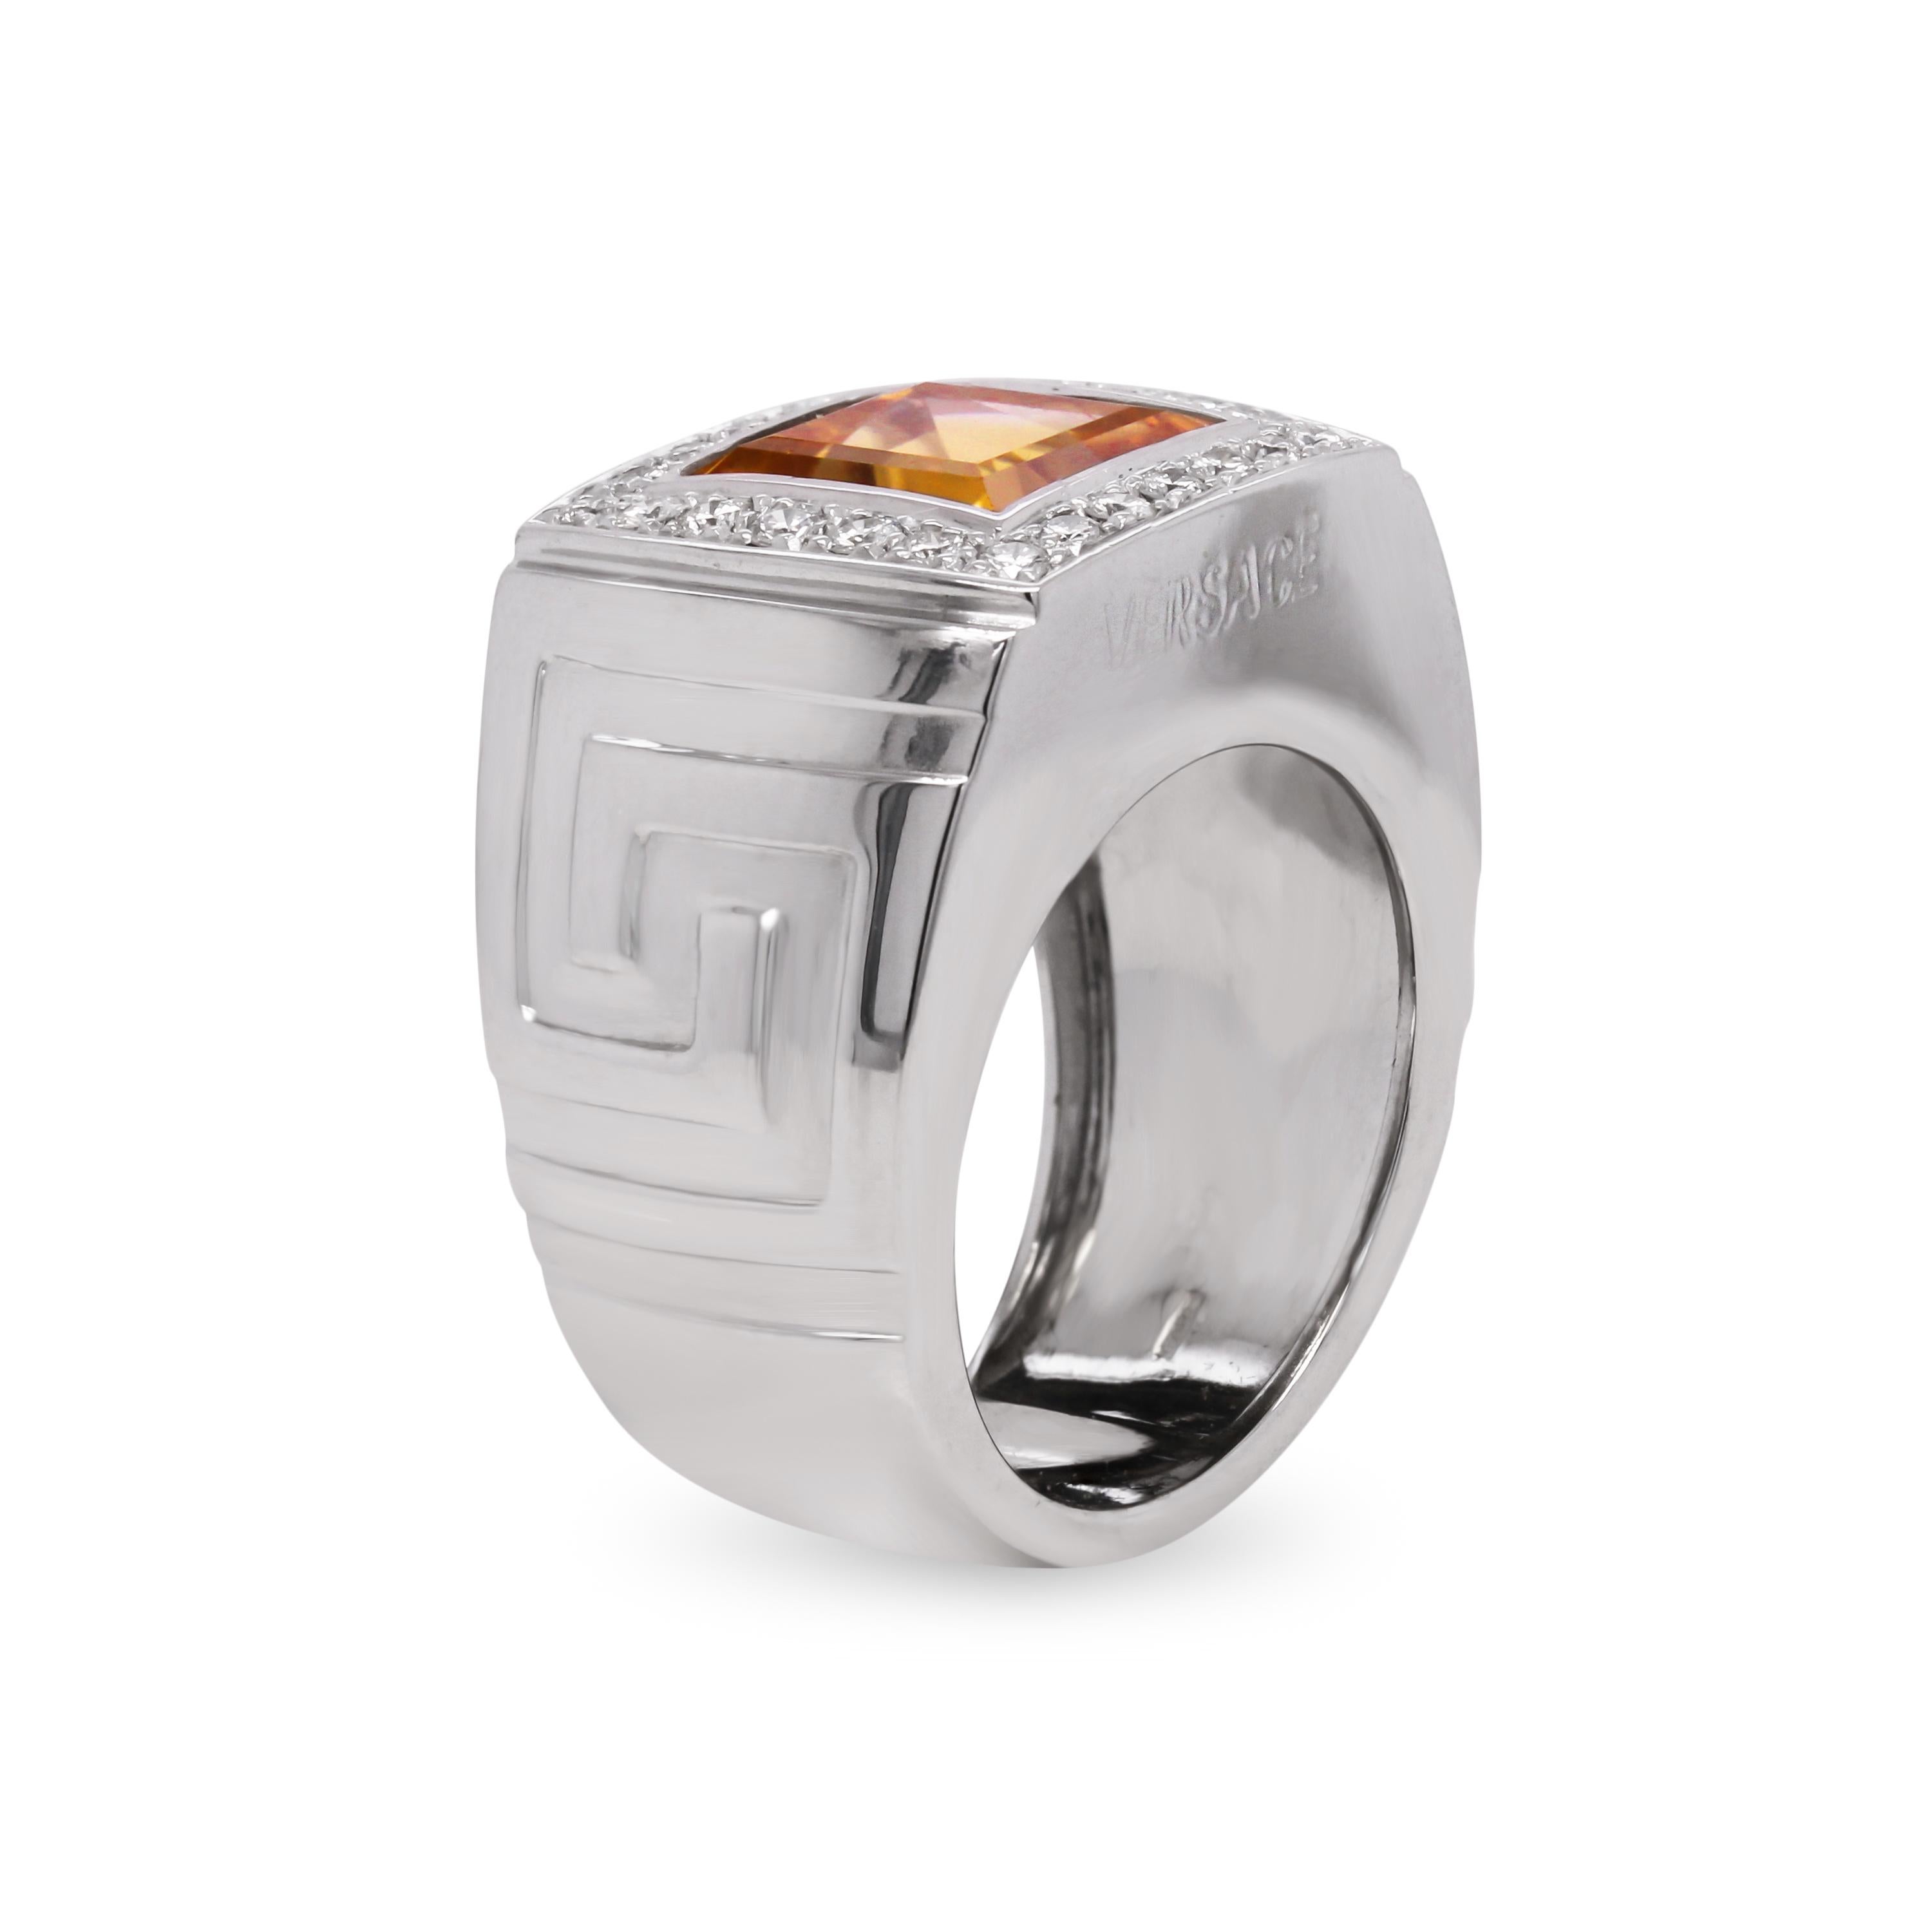 Versace 18 Karat White Gold Diamond Princess Cut Citrine Statement Ring

This Versace statement ring is an absolute work of art! The ring has the signature Versace patterns on the band and is a bit chunky which gives this ring a fun look.

Apprx